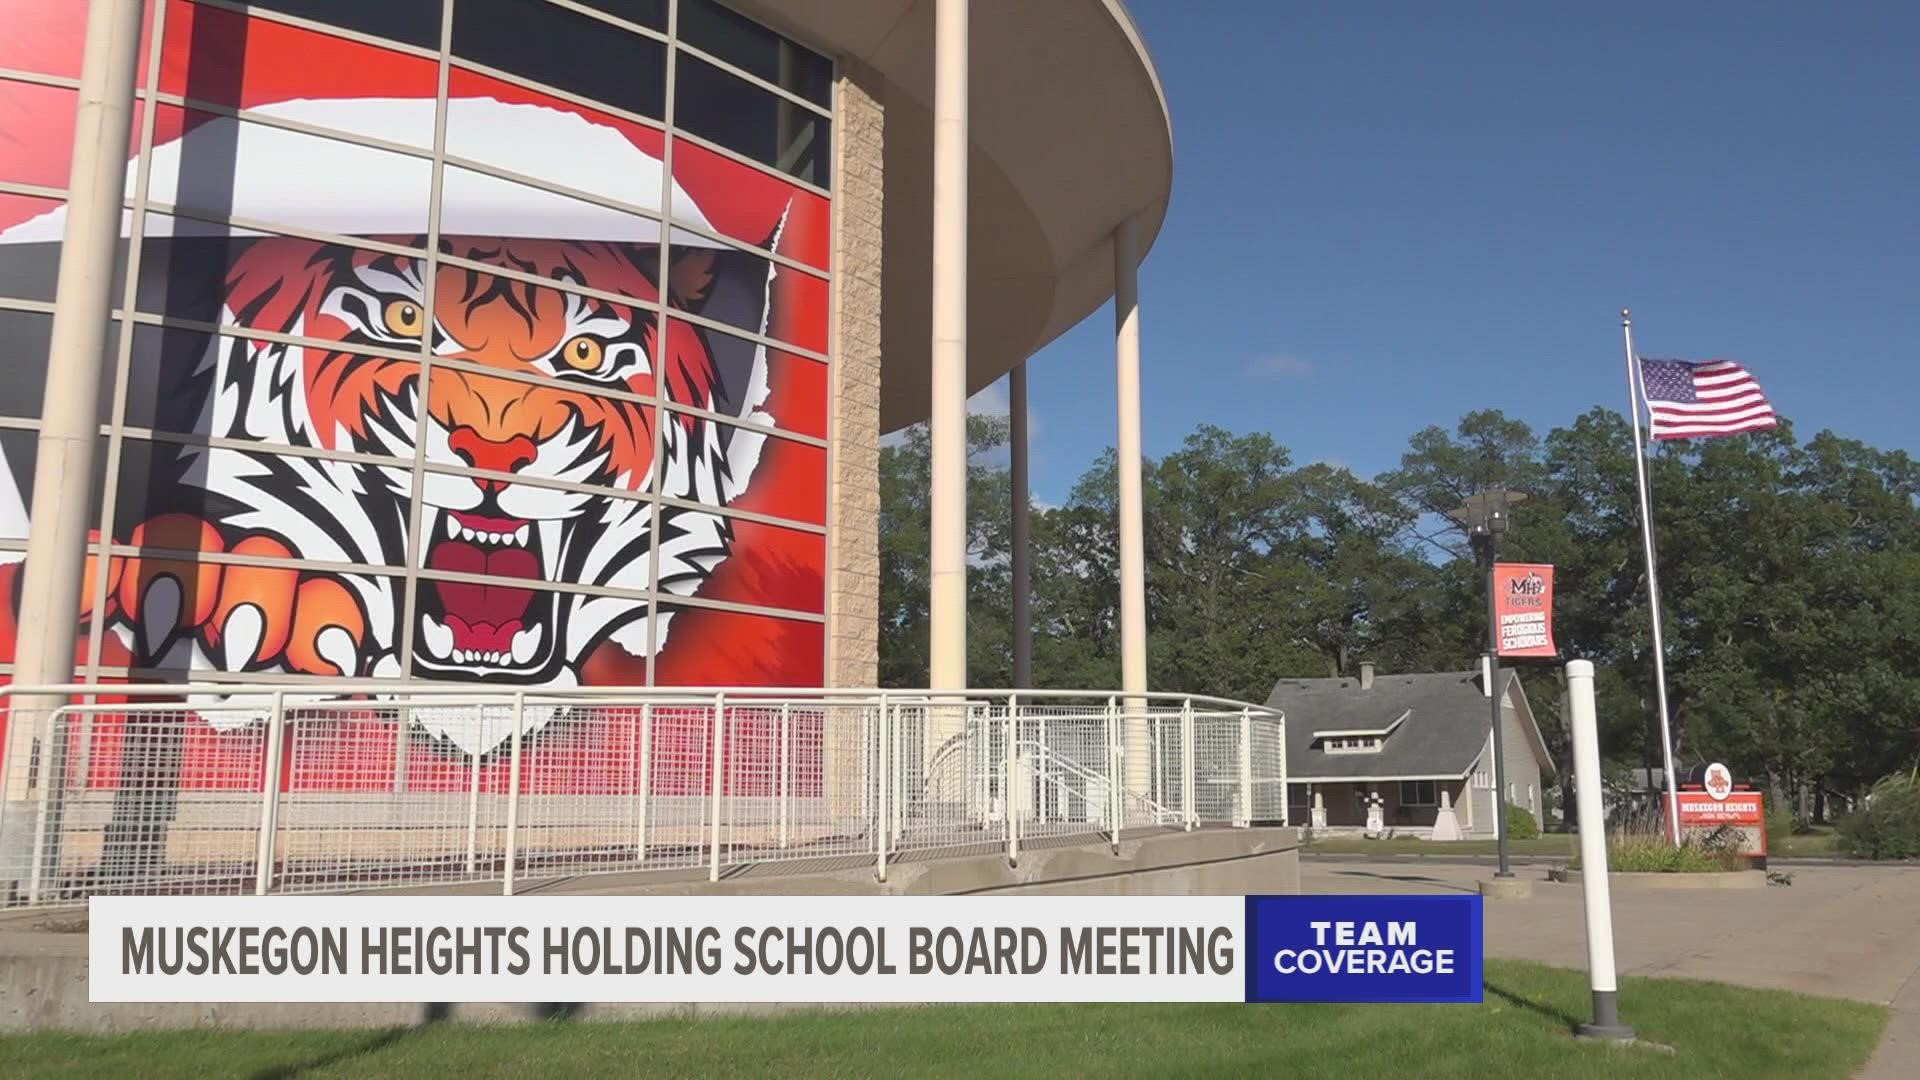 Monday's protest came ahead of a special meeting at the High School.